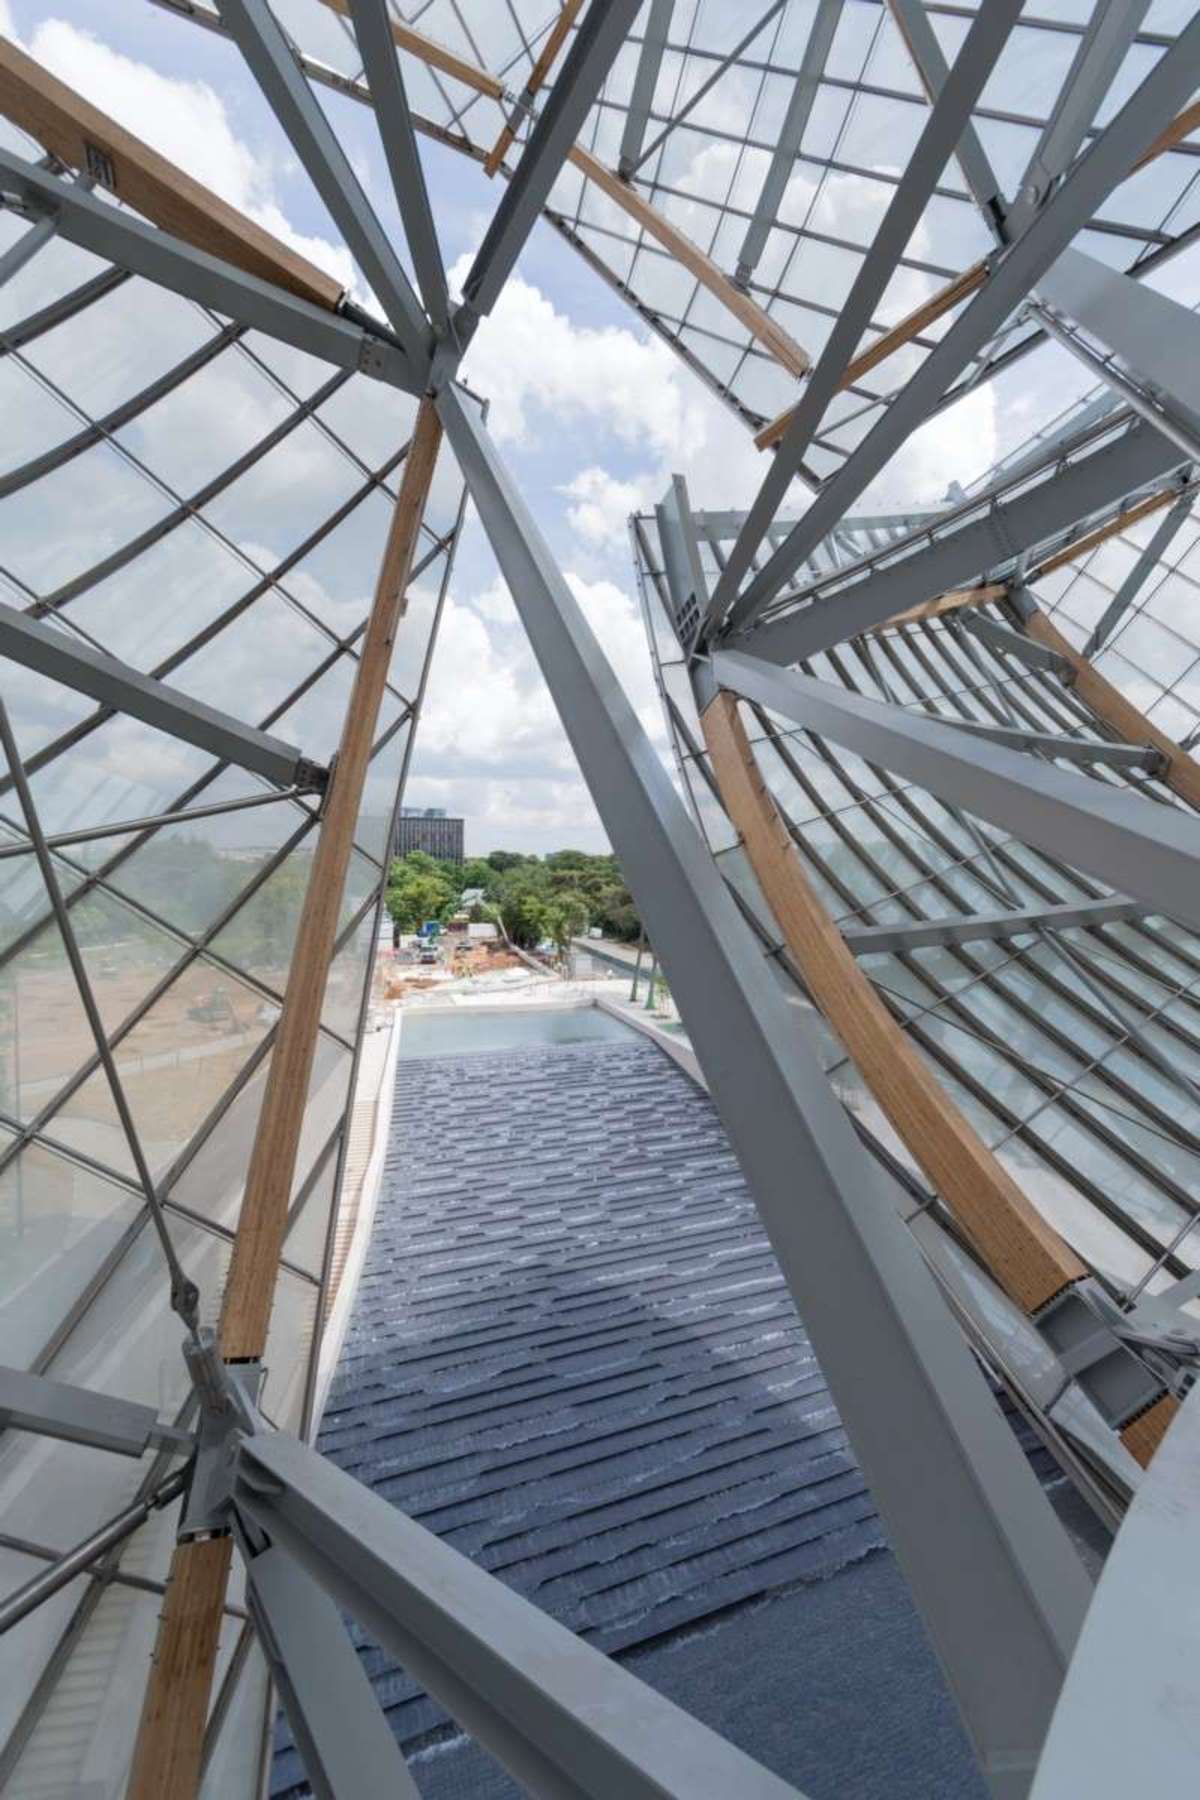 Louis Vuitton Foundation ❤ Frank Gehry Architects